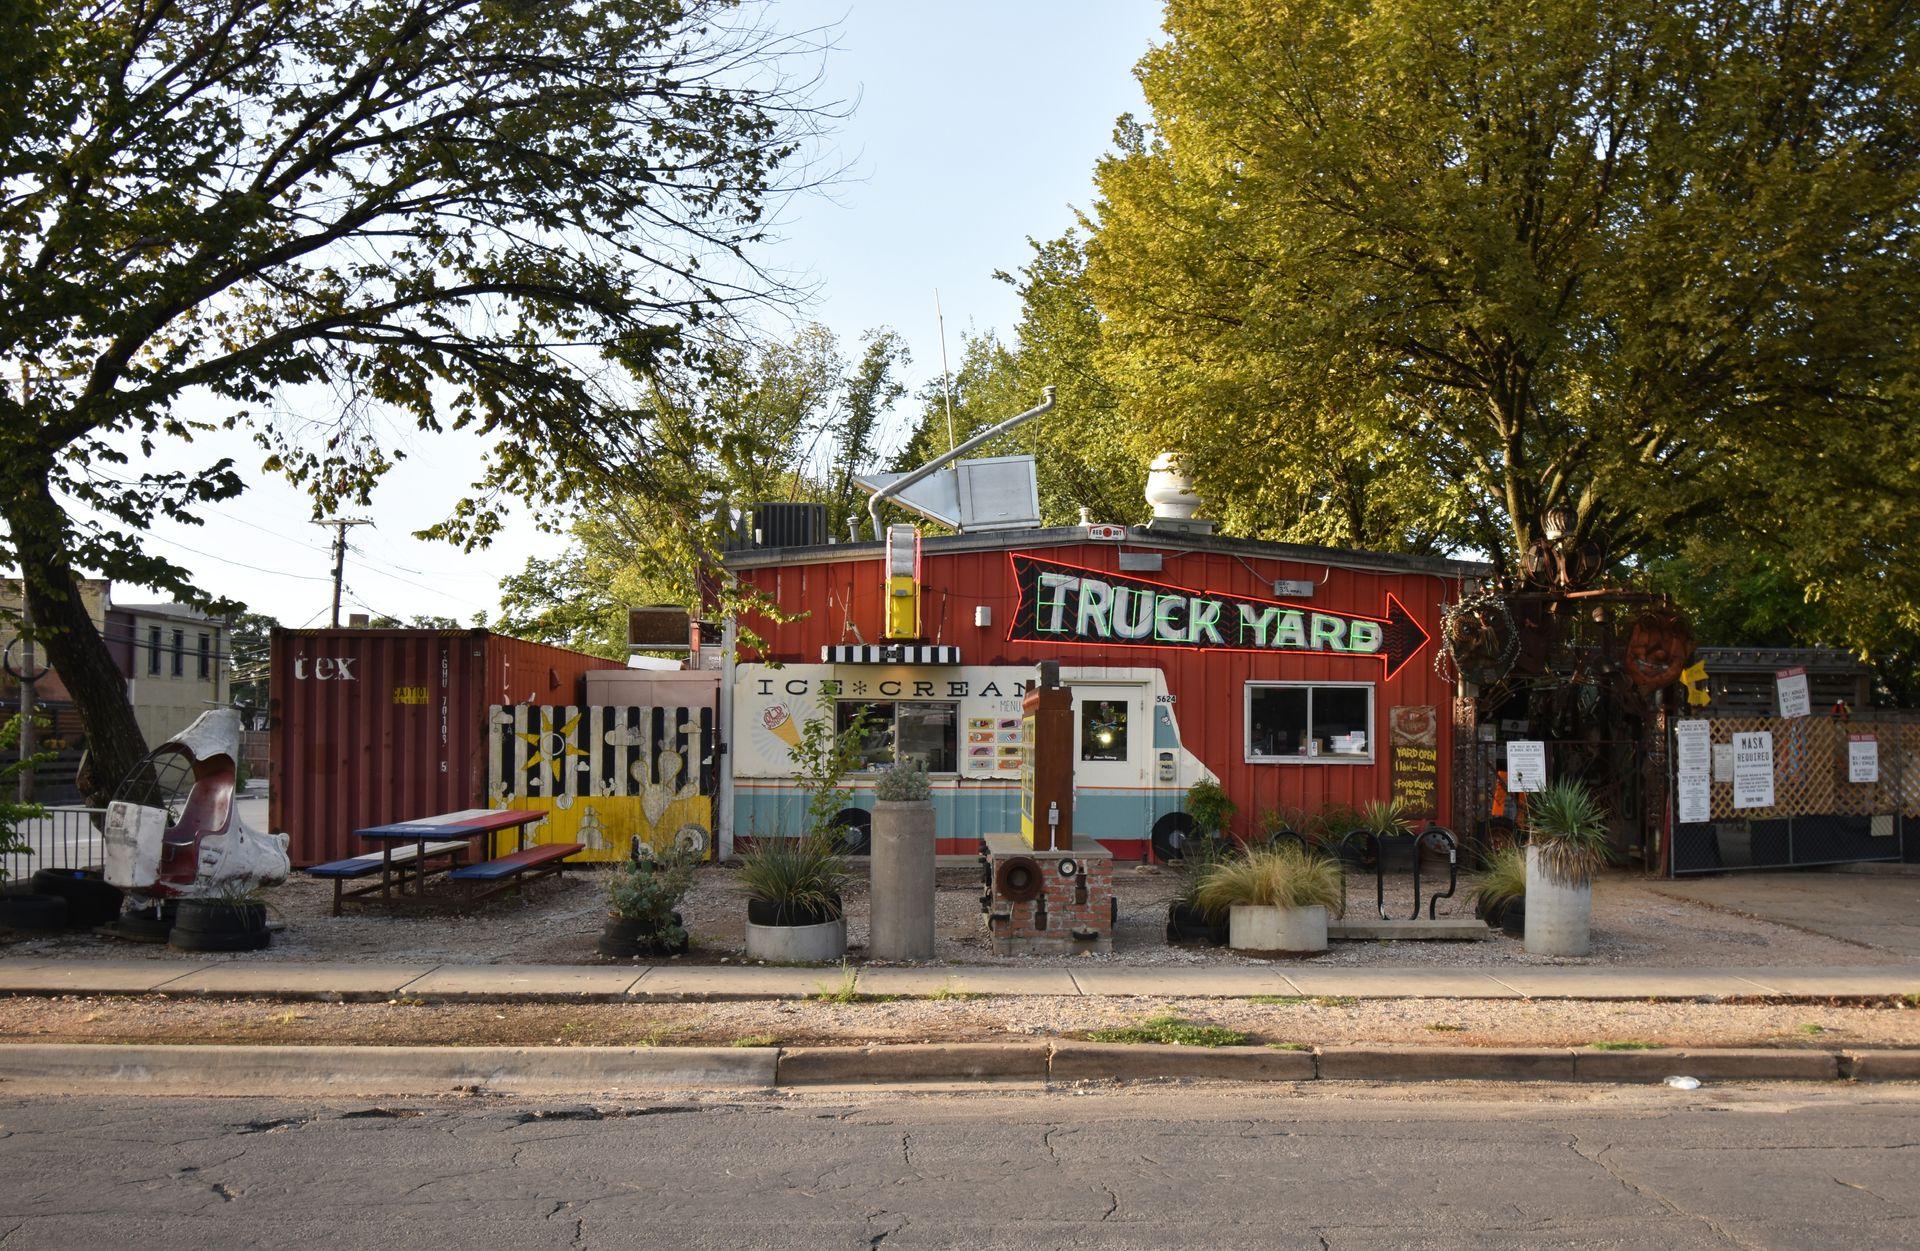 The exterior of Truck Yard. The building is red and there is a painting of an ice cream truck with an ice cream window out front.